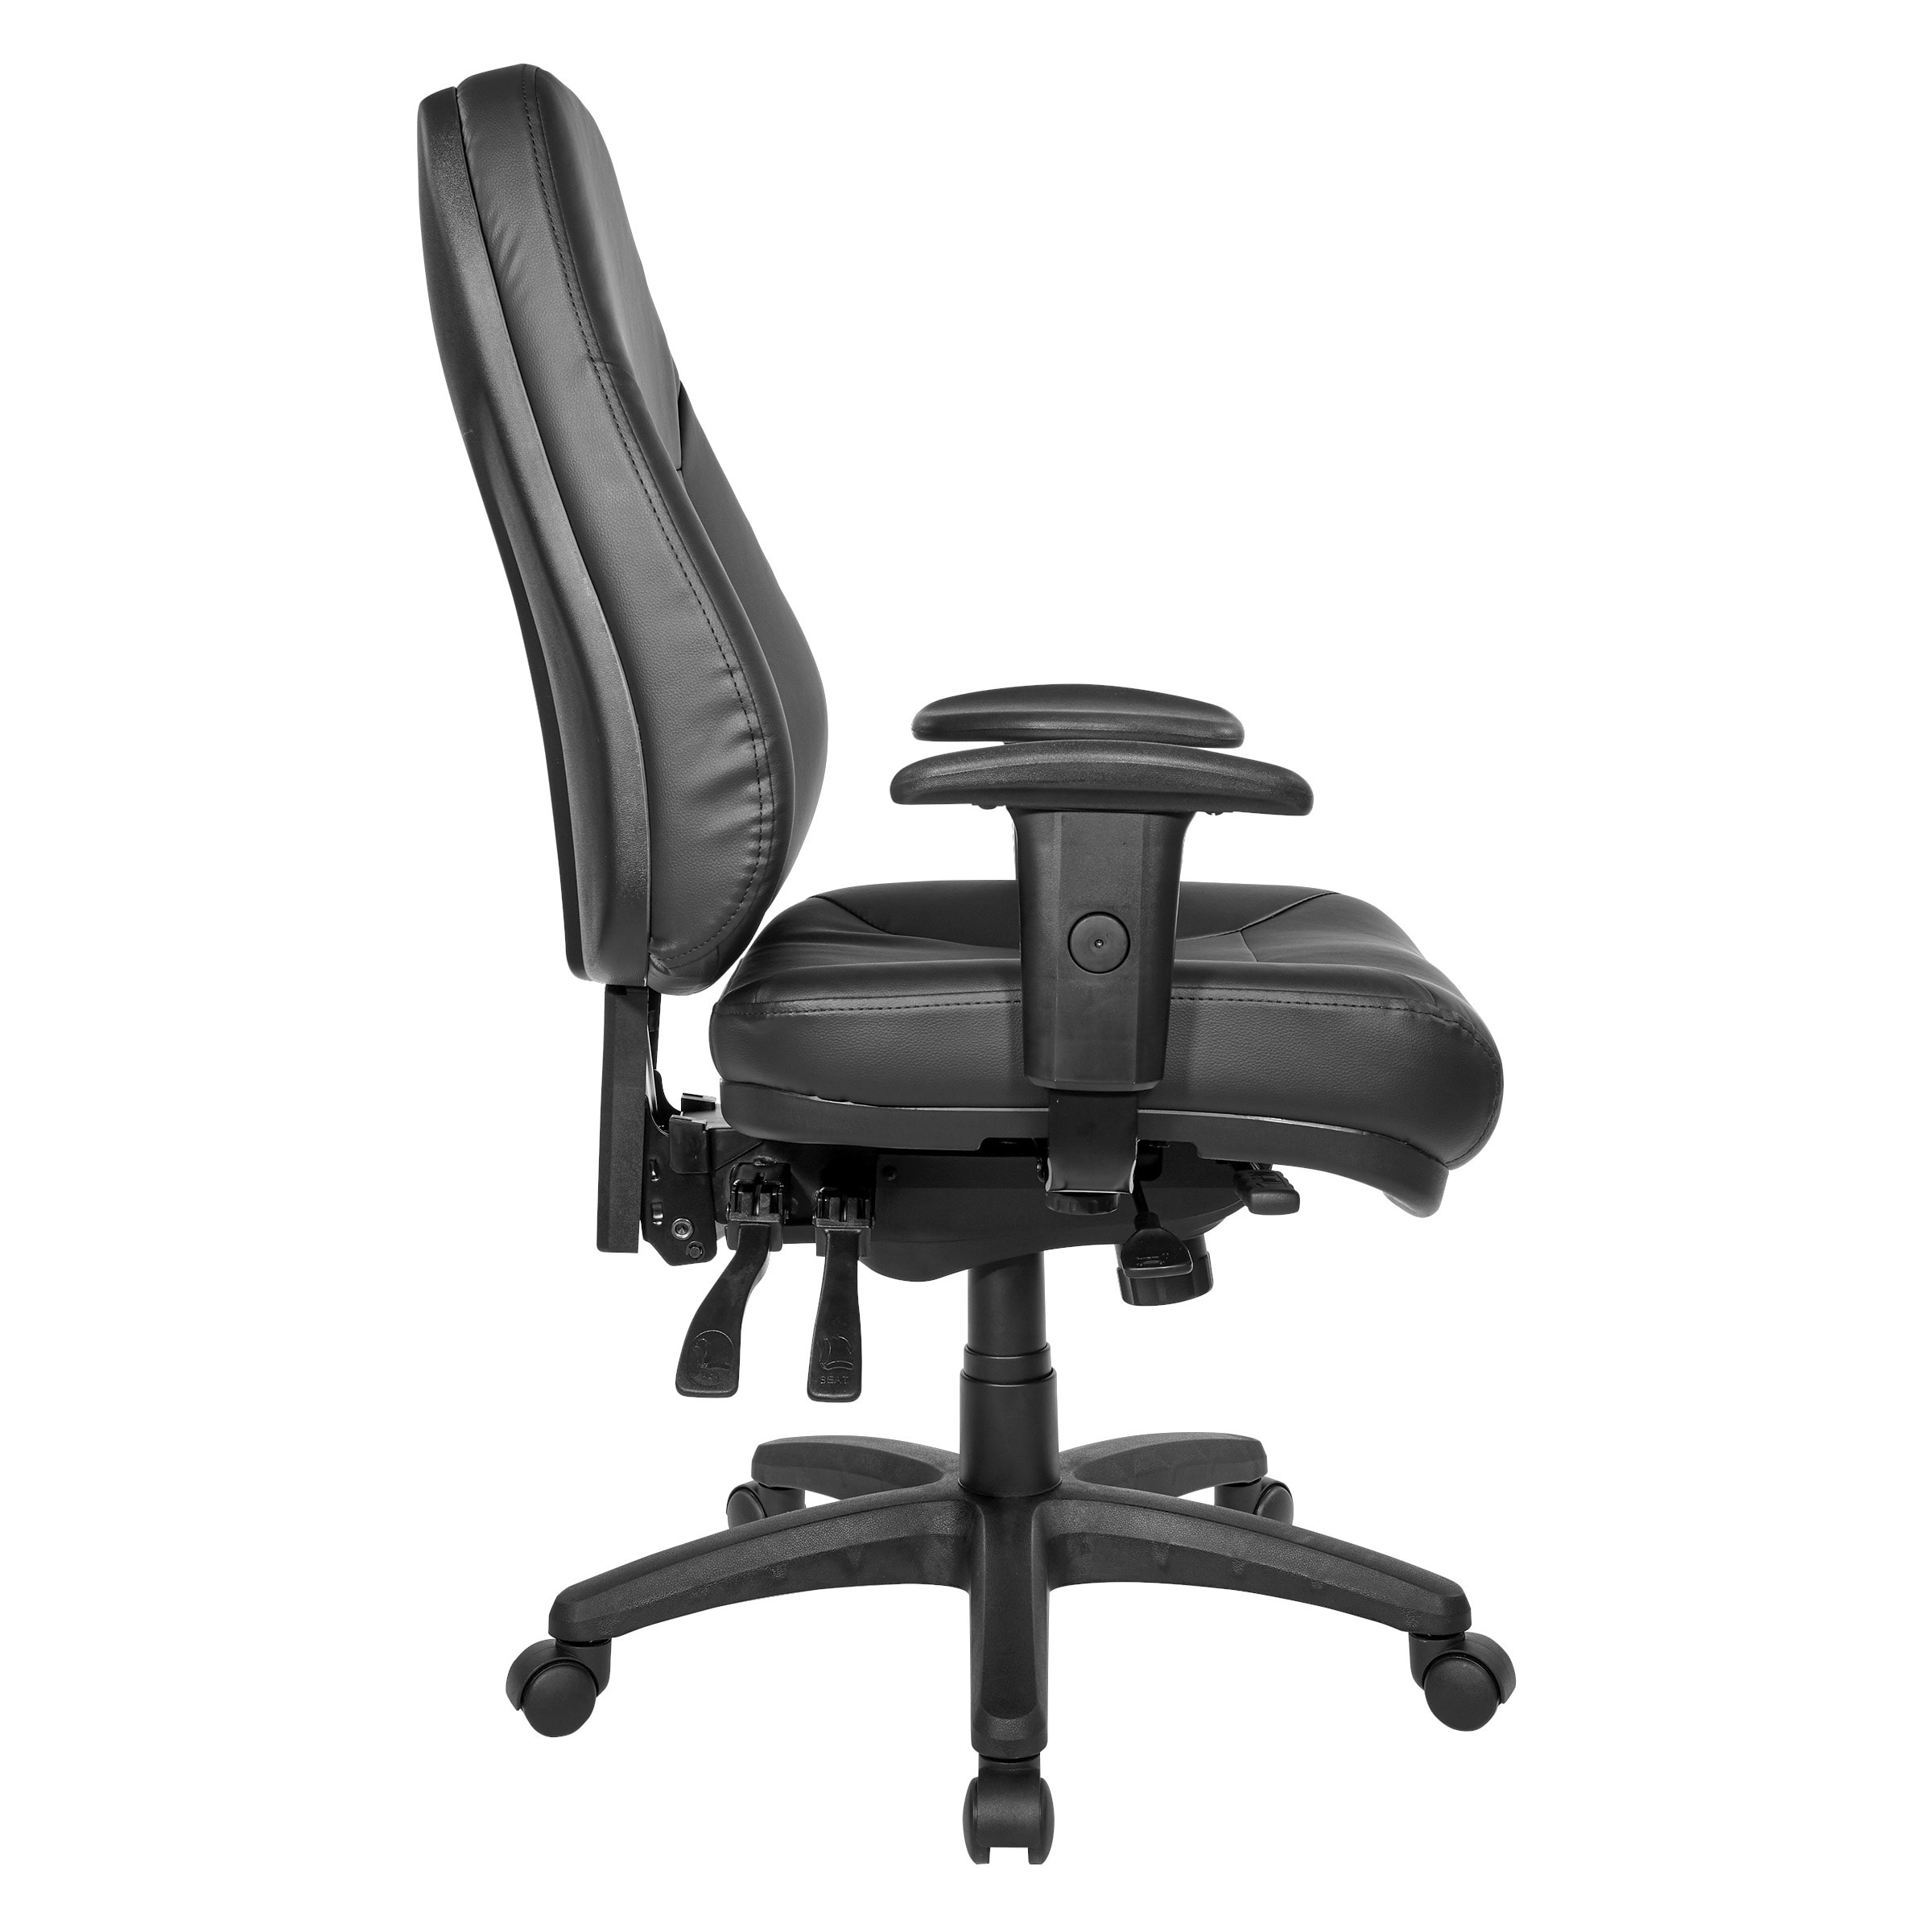 https://ak1.ostkcdn.com/images/products/28244862/Work-Smart-Deluxe-Multi-Function-High-Back-Chair-ba1423c4-590d-4187-9c39-88680f6df0f0.jpg